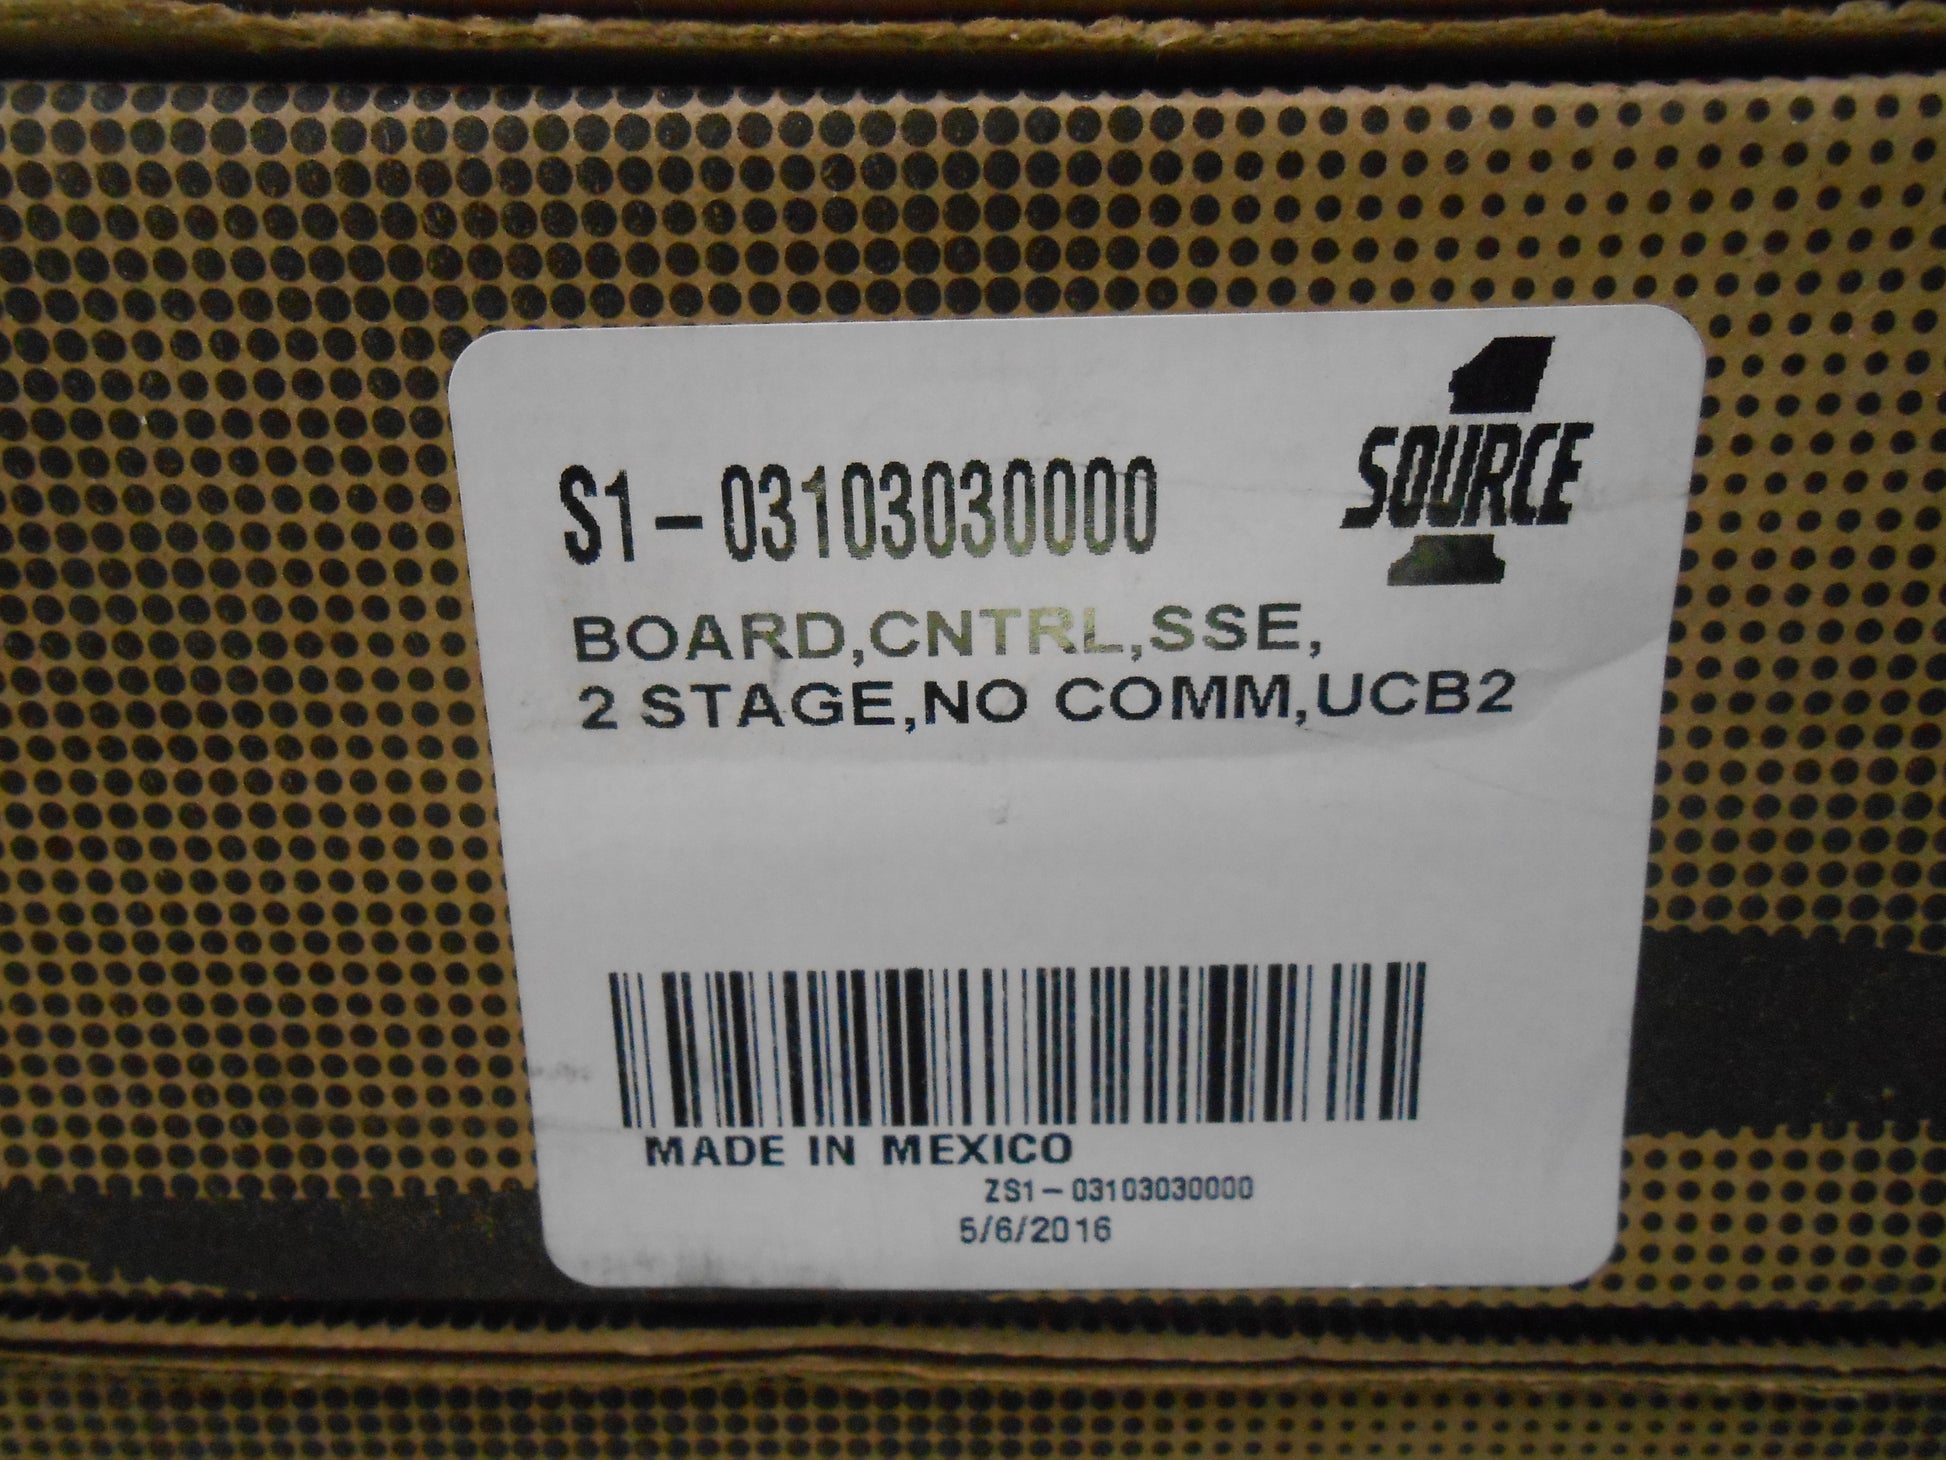 CONTROL BOARD, SSE, 2 STAGE, NO COMM, UCB2